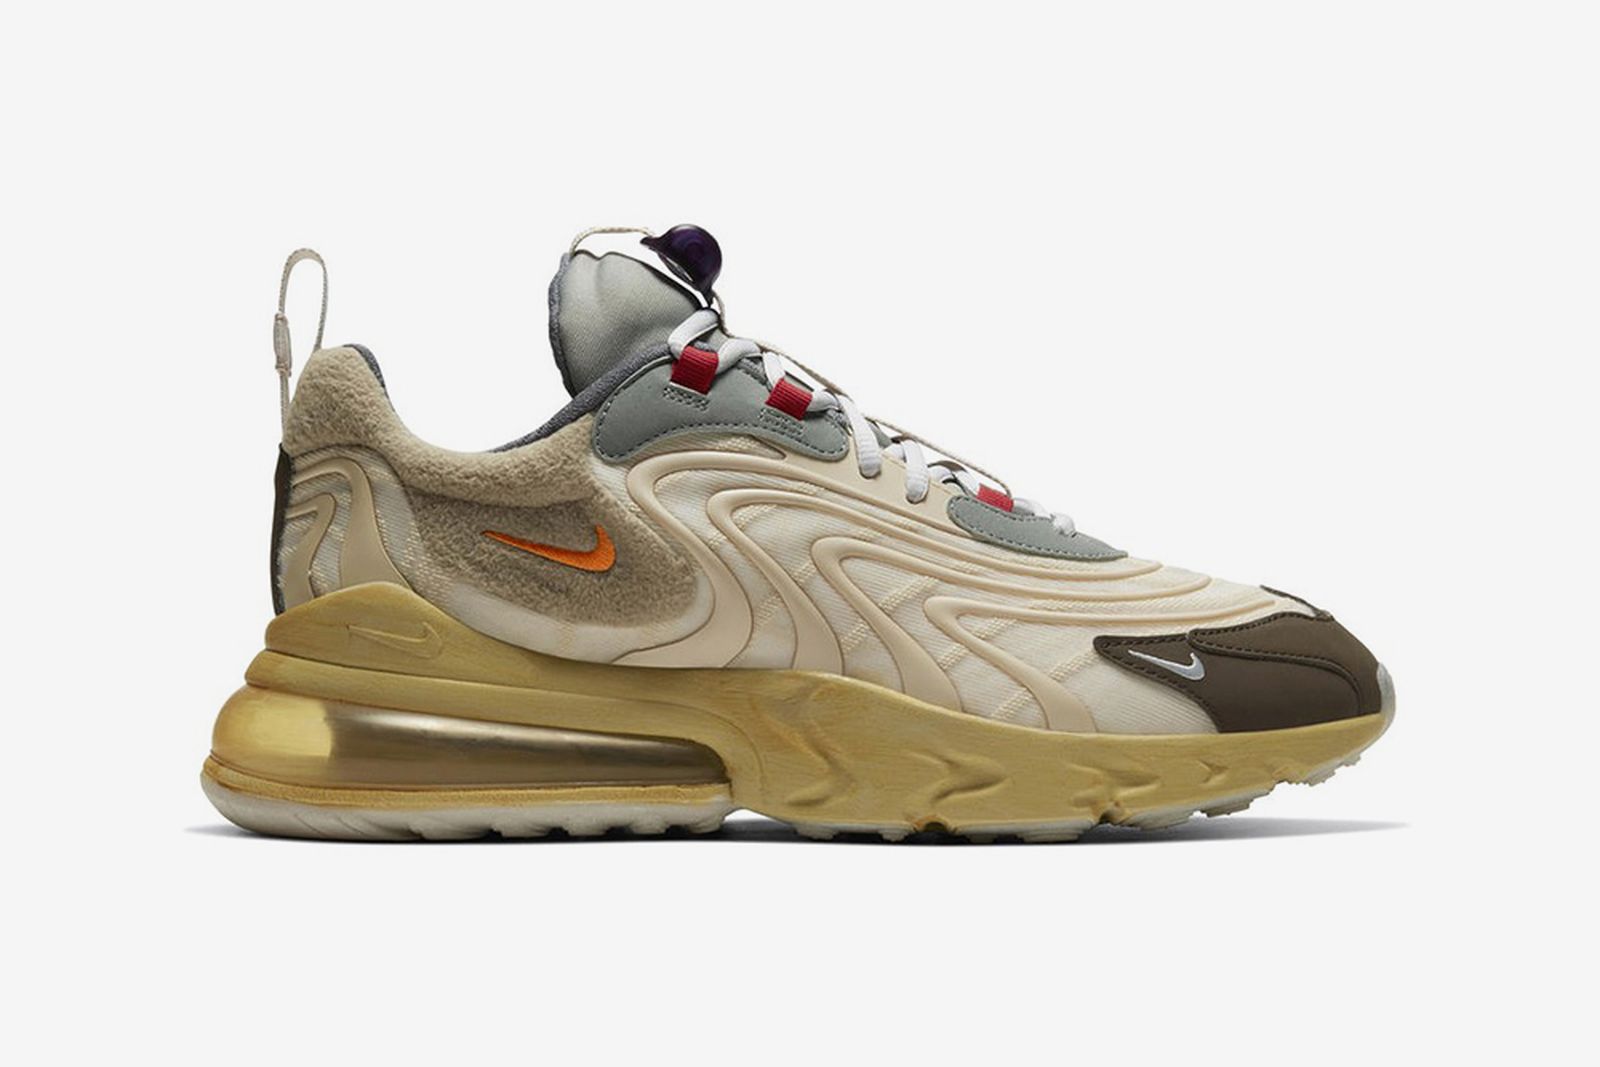 Travis Scott x Nike Air Max 270: How & Where to Buy Today